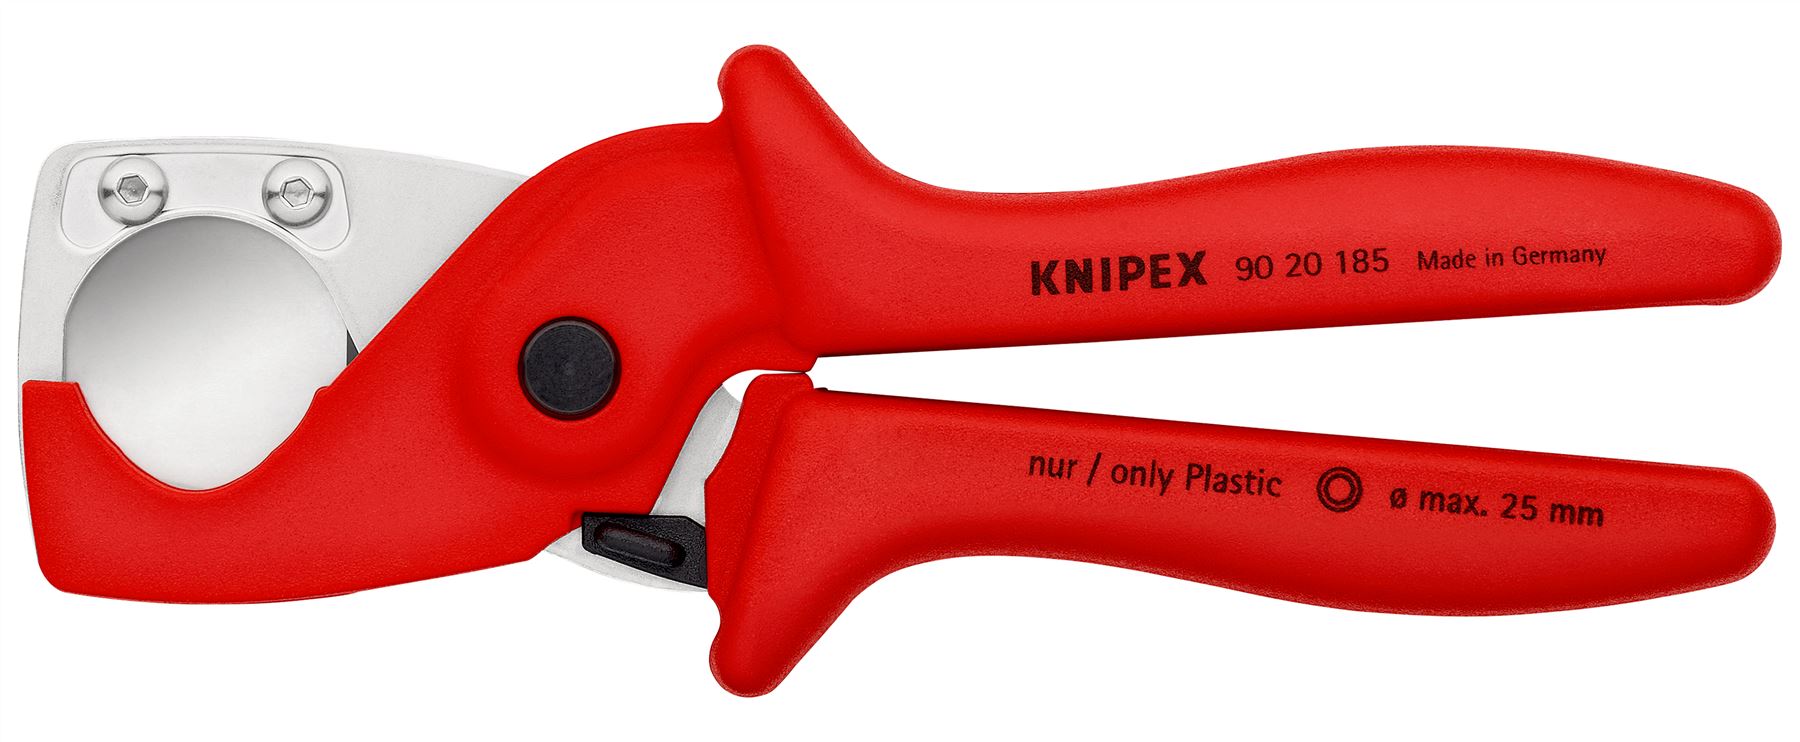 Knipex PlastiCut Cutter fro Flexible Hoses and Plastic Conduit Pipe 185mm 25mm Capacity 90 20 185